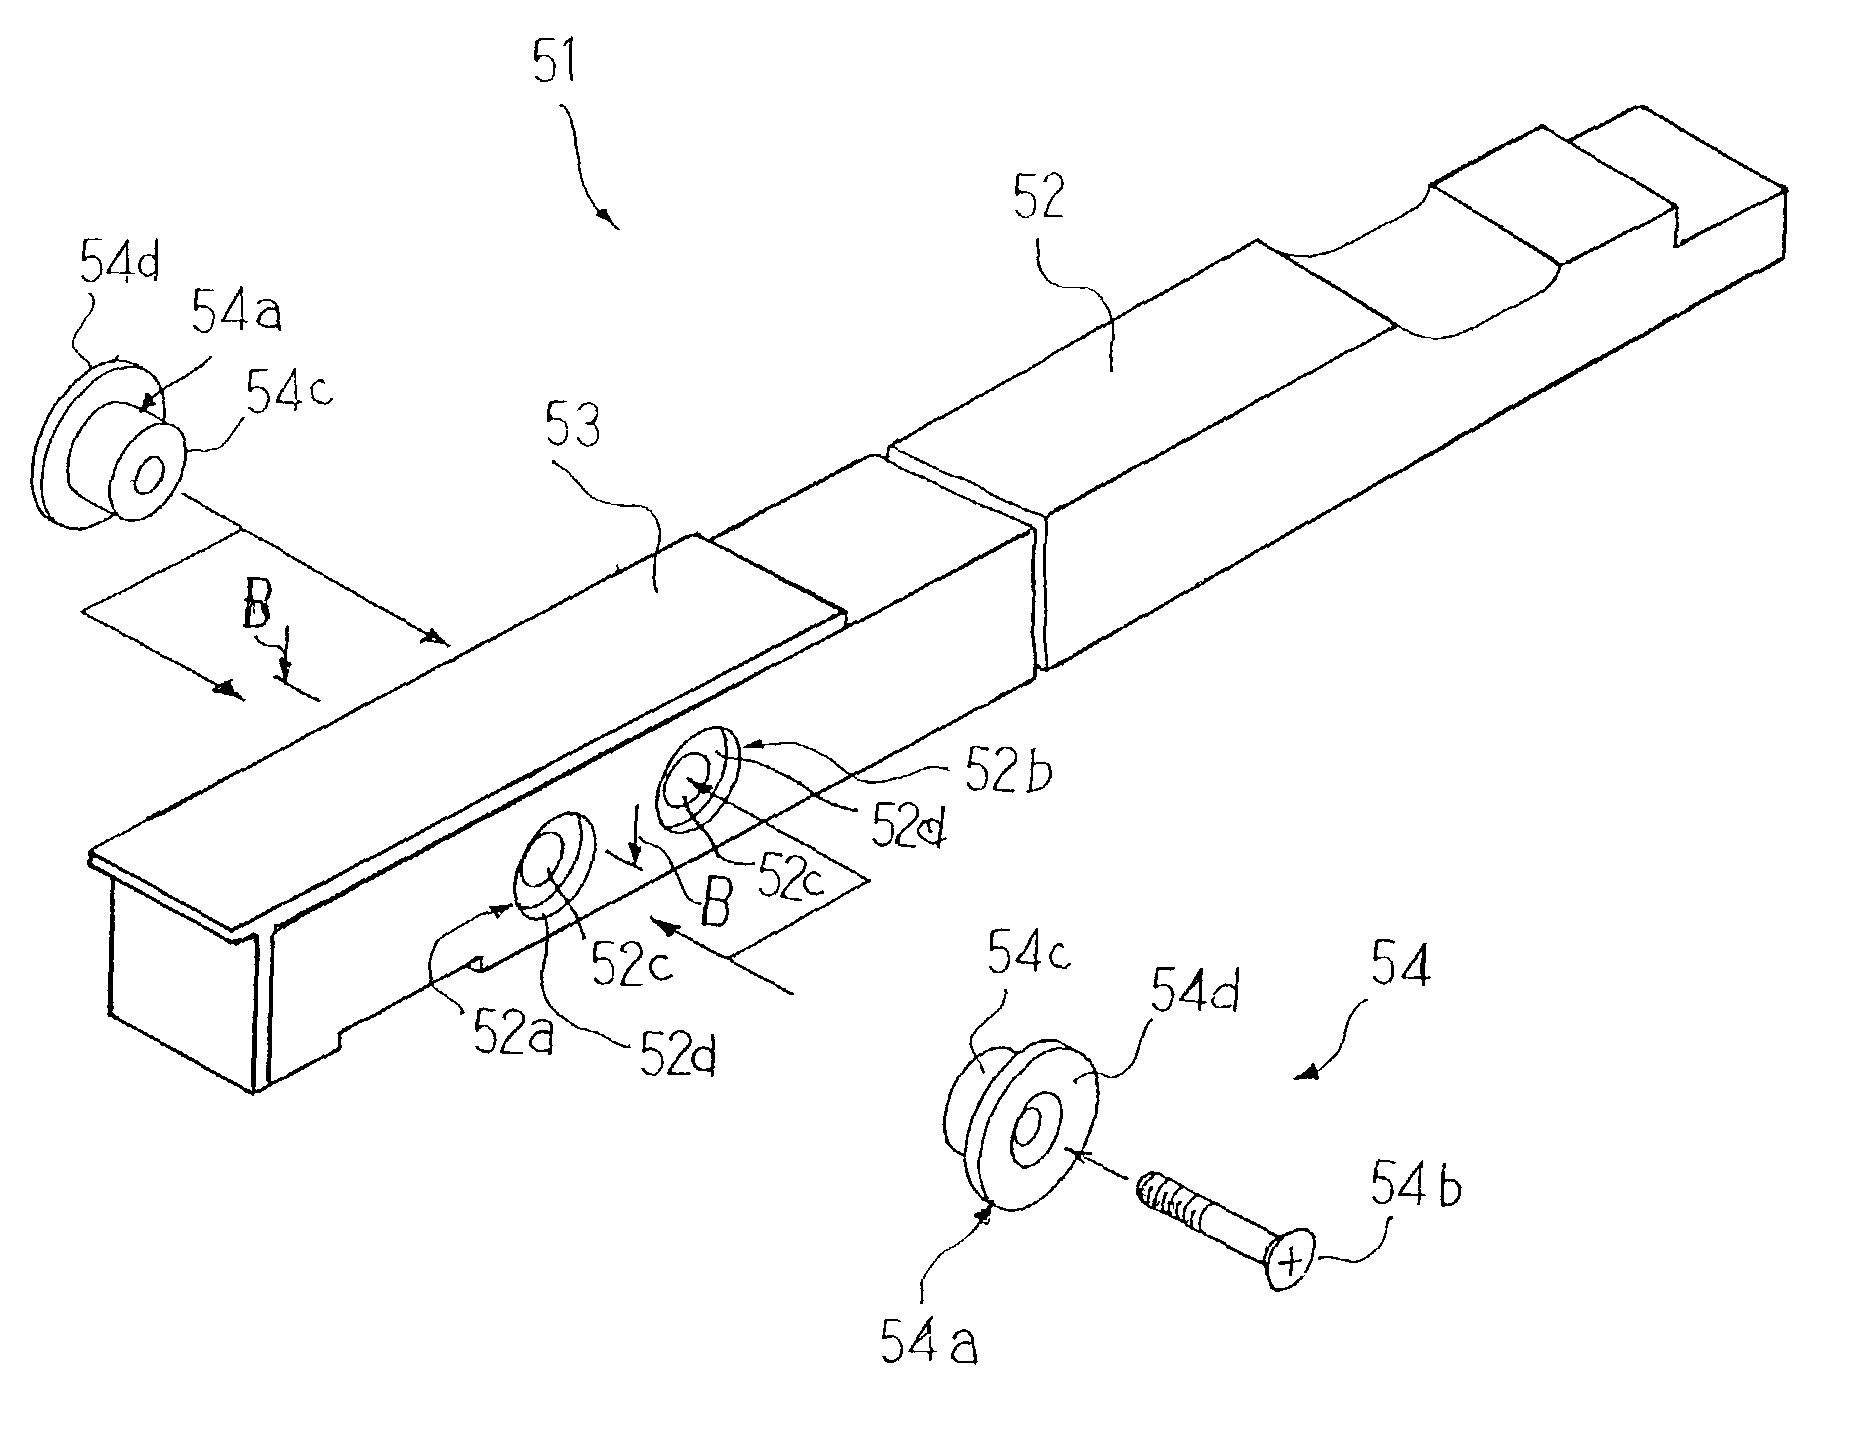 Keyboard musical instrument having keys regulated with stable key balance pieces